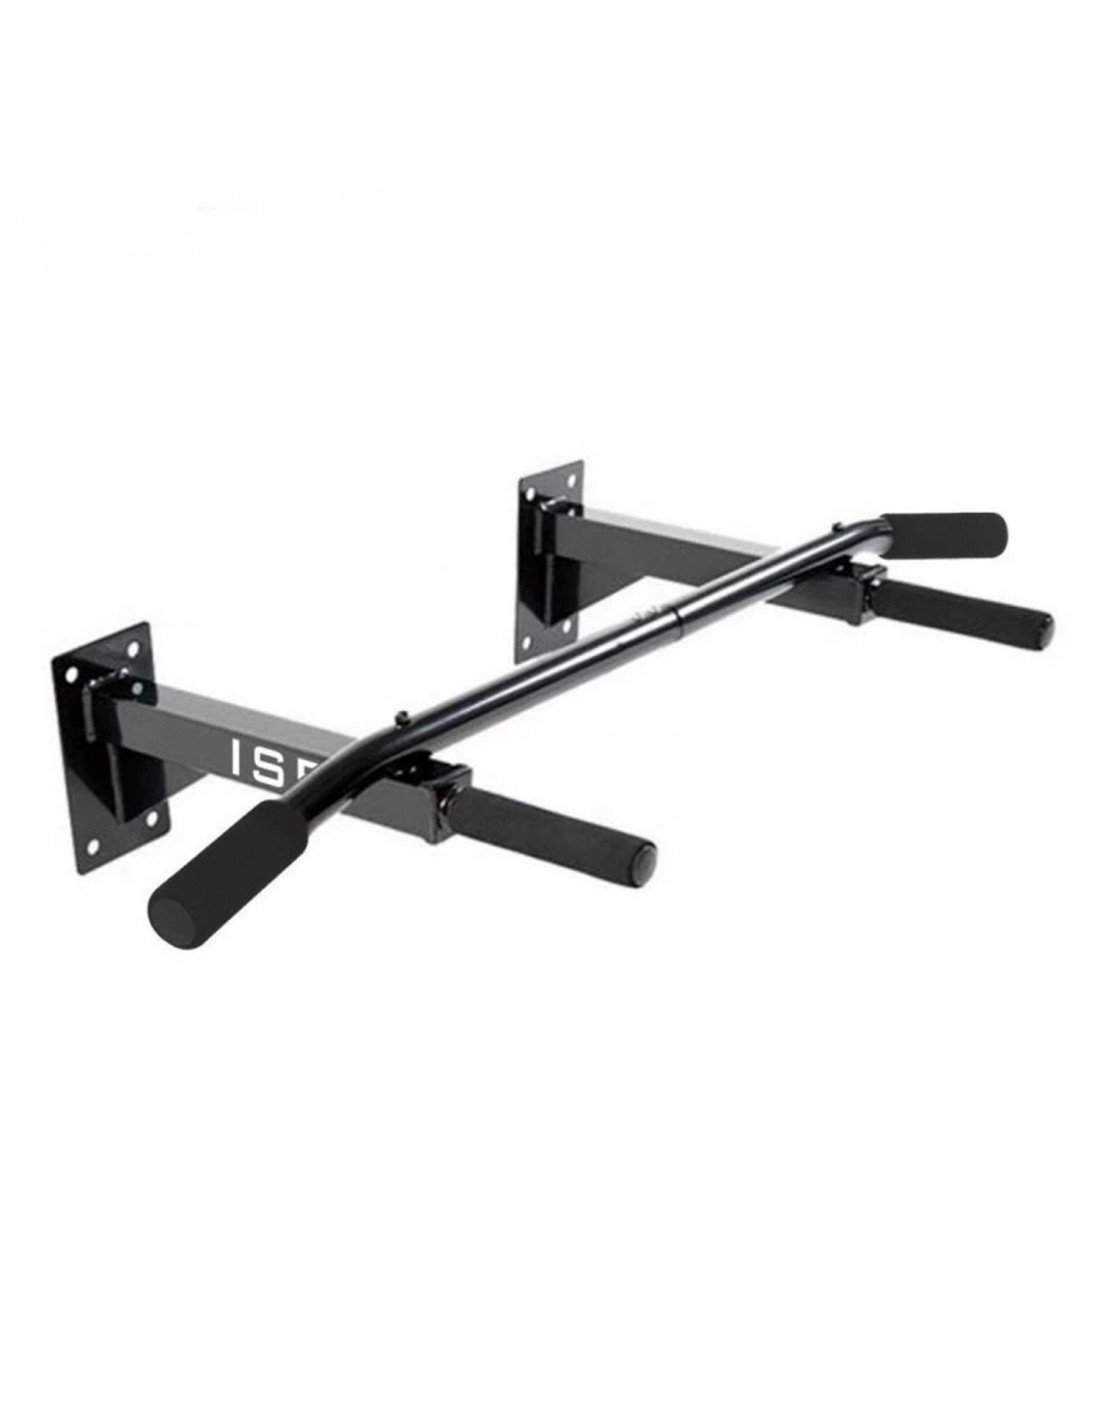 ISE FIT. SY-165 • CHIN UP BAR. BARRE DE TRACTION MURALE.